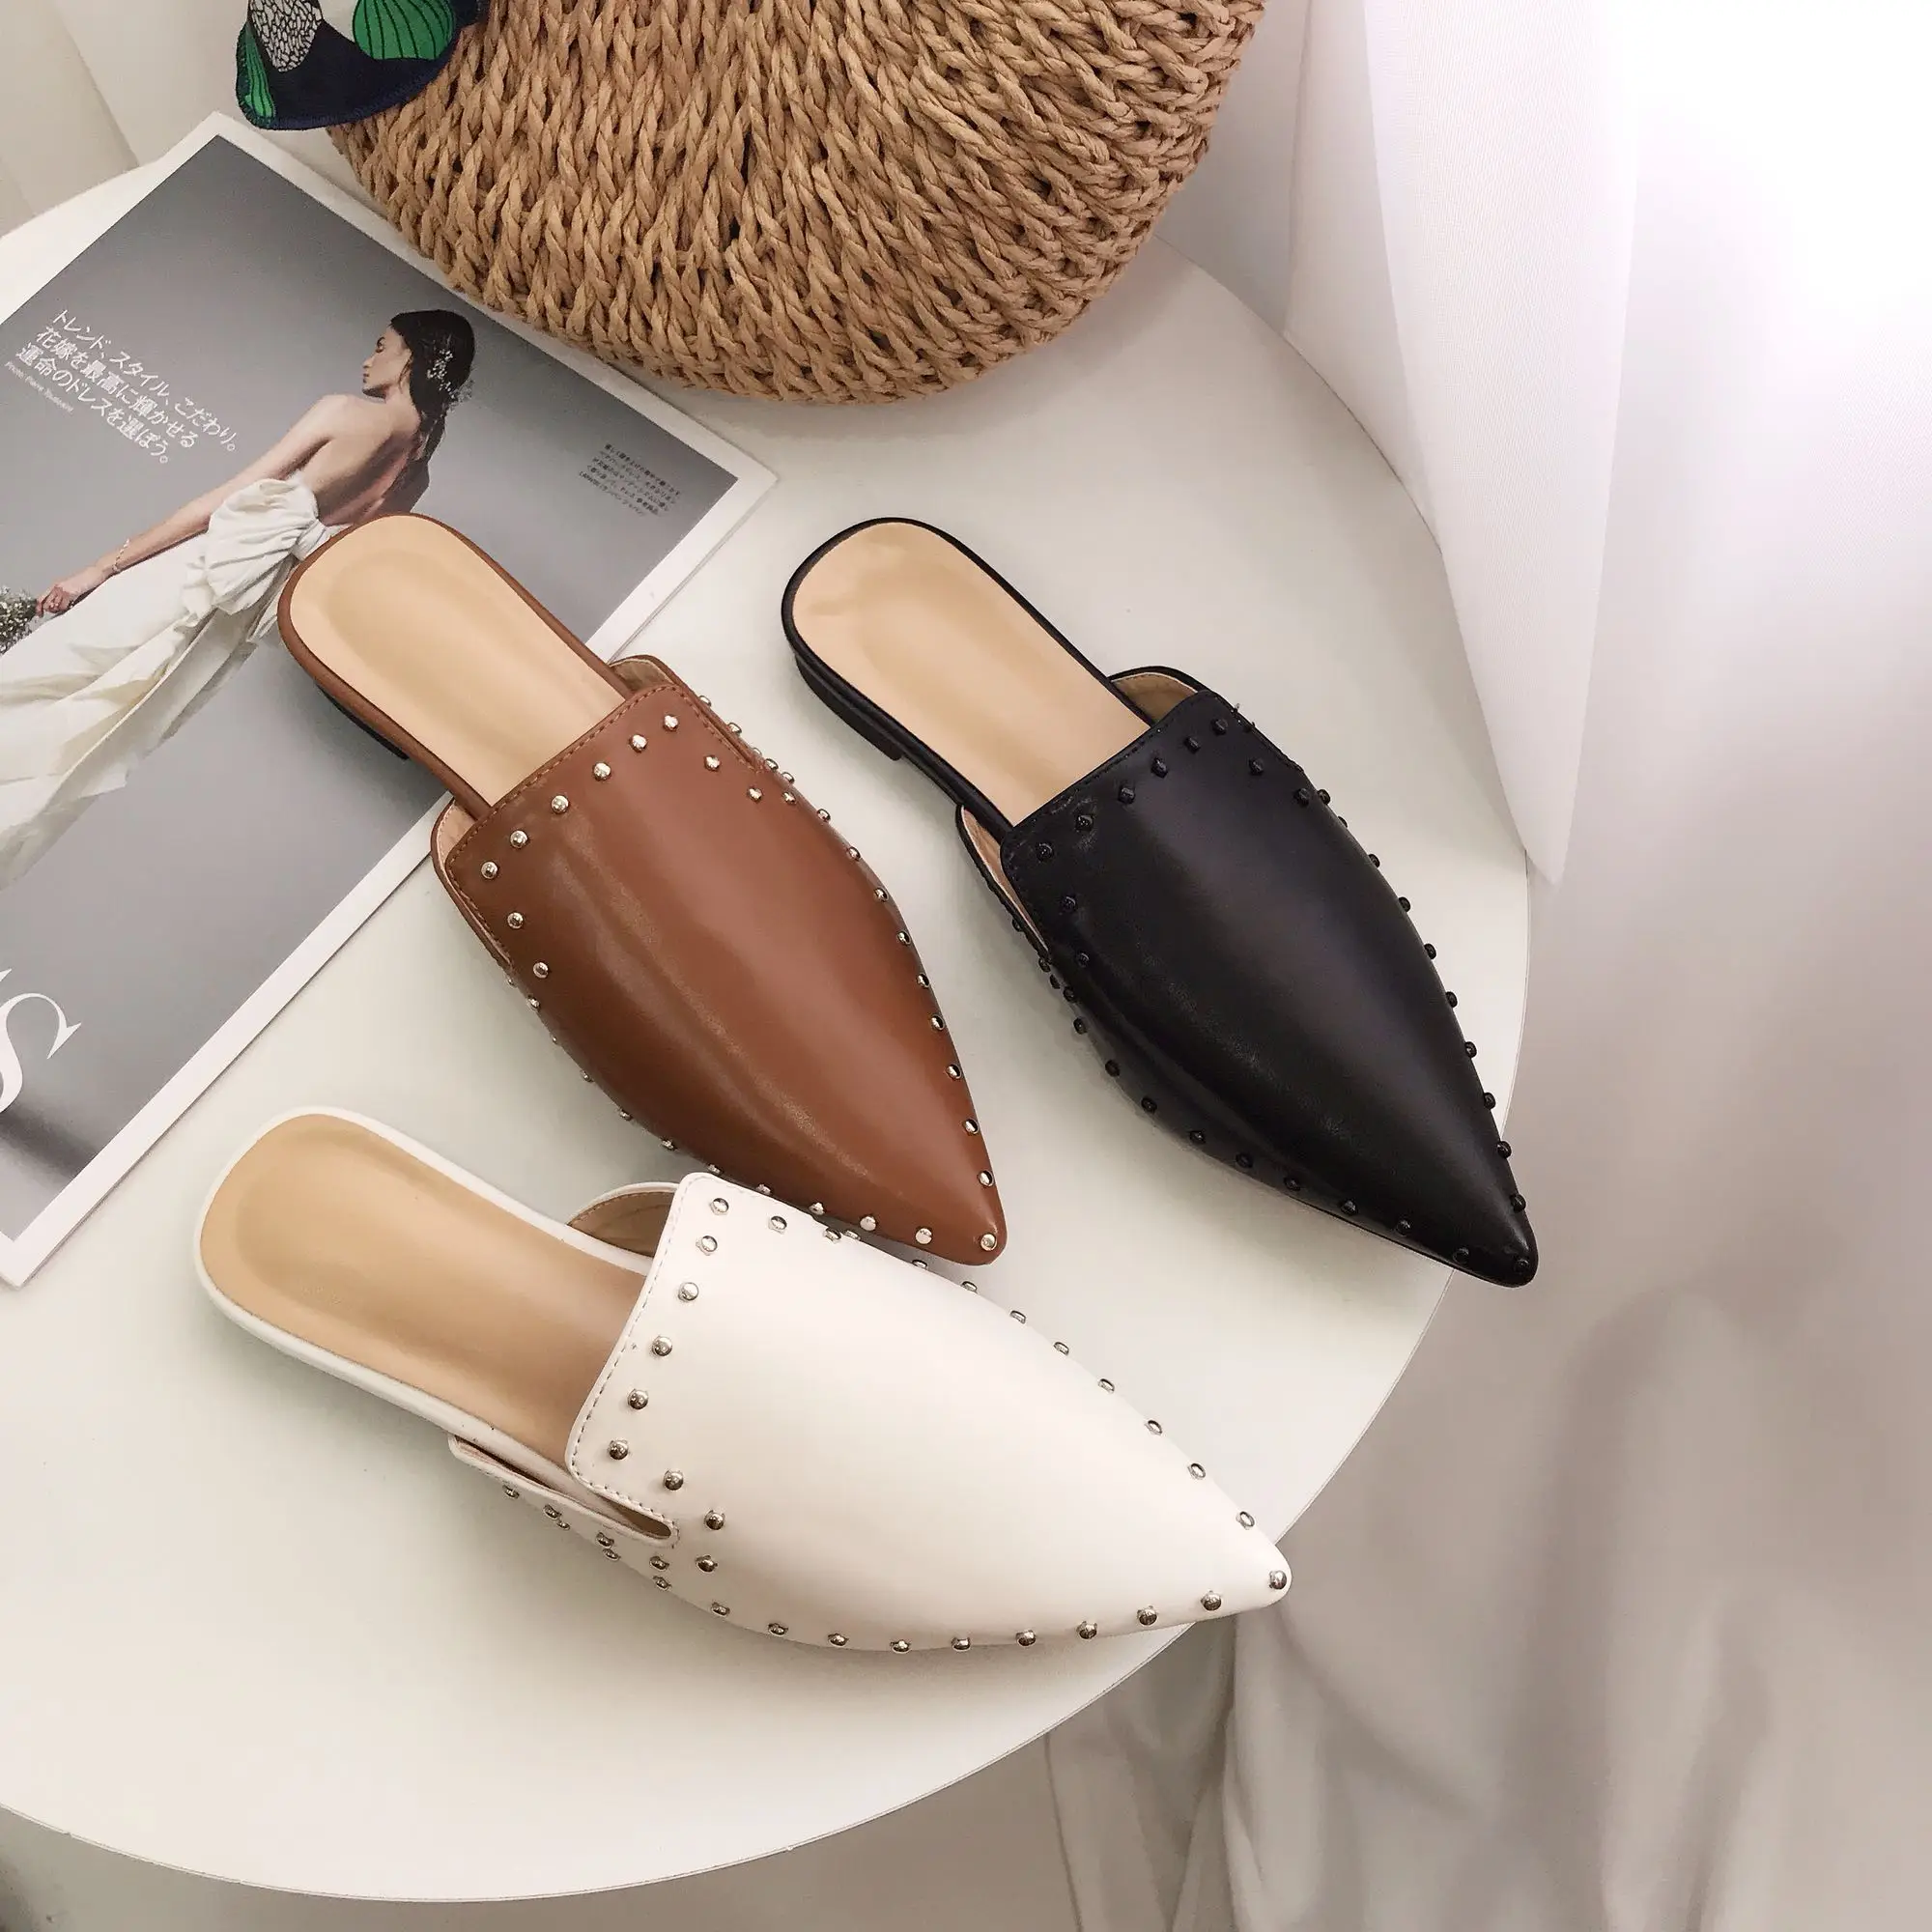 

Women Studs Mules Low Heels Pointed Toe Soft Leather Slip Ons Slides Lady Summer Slippers